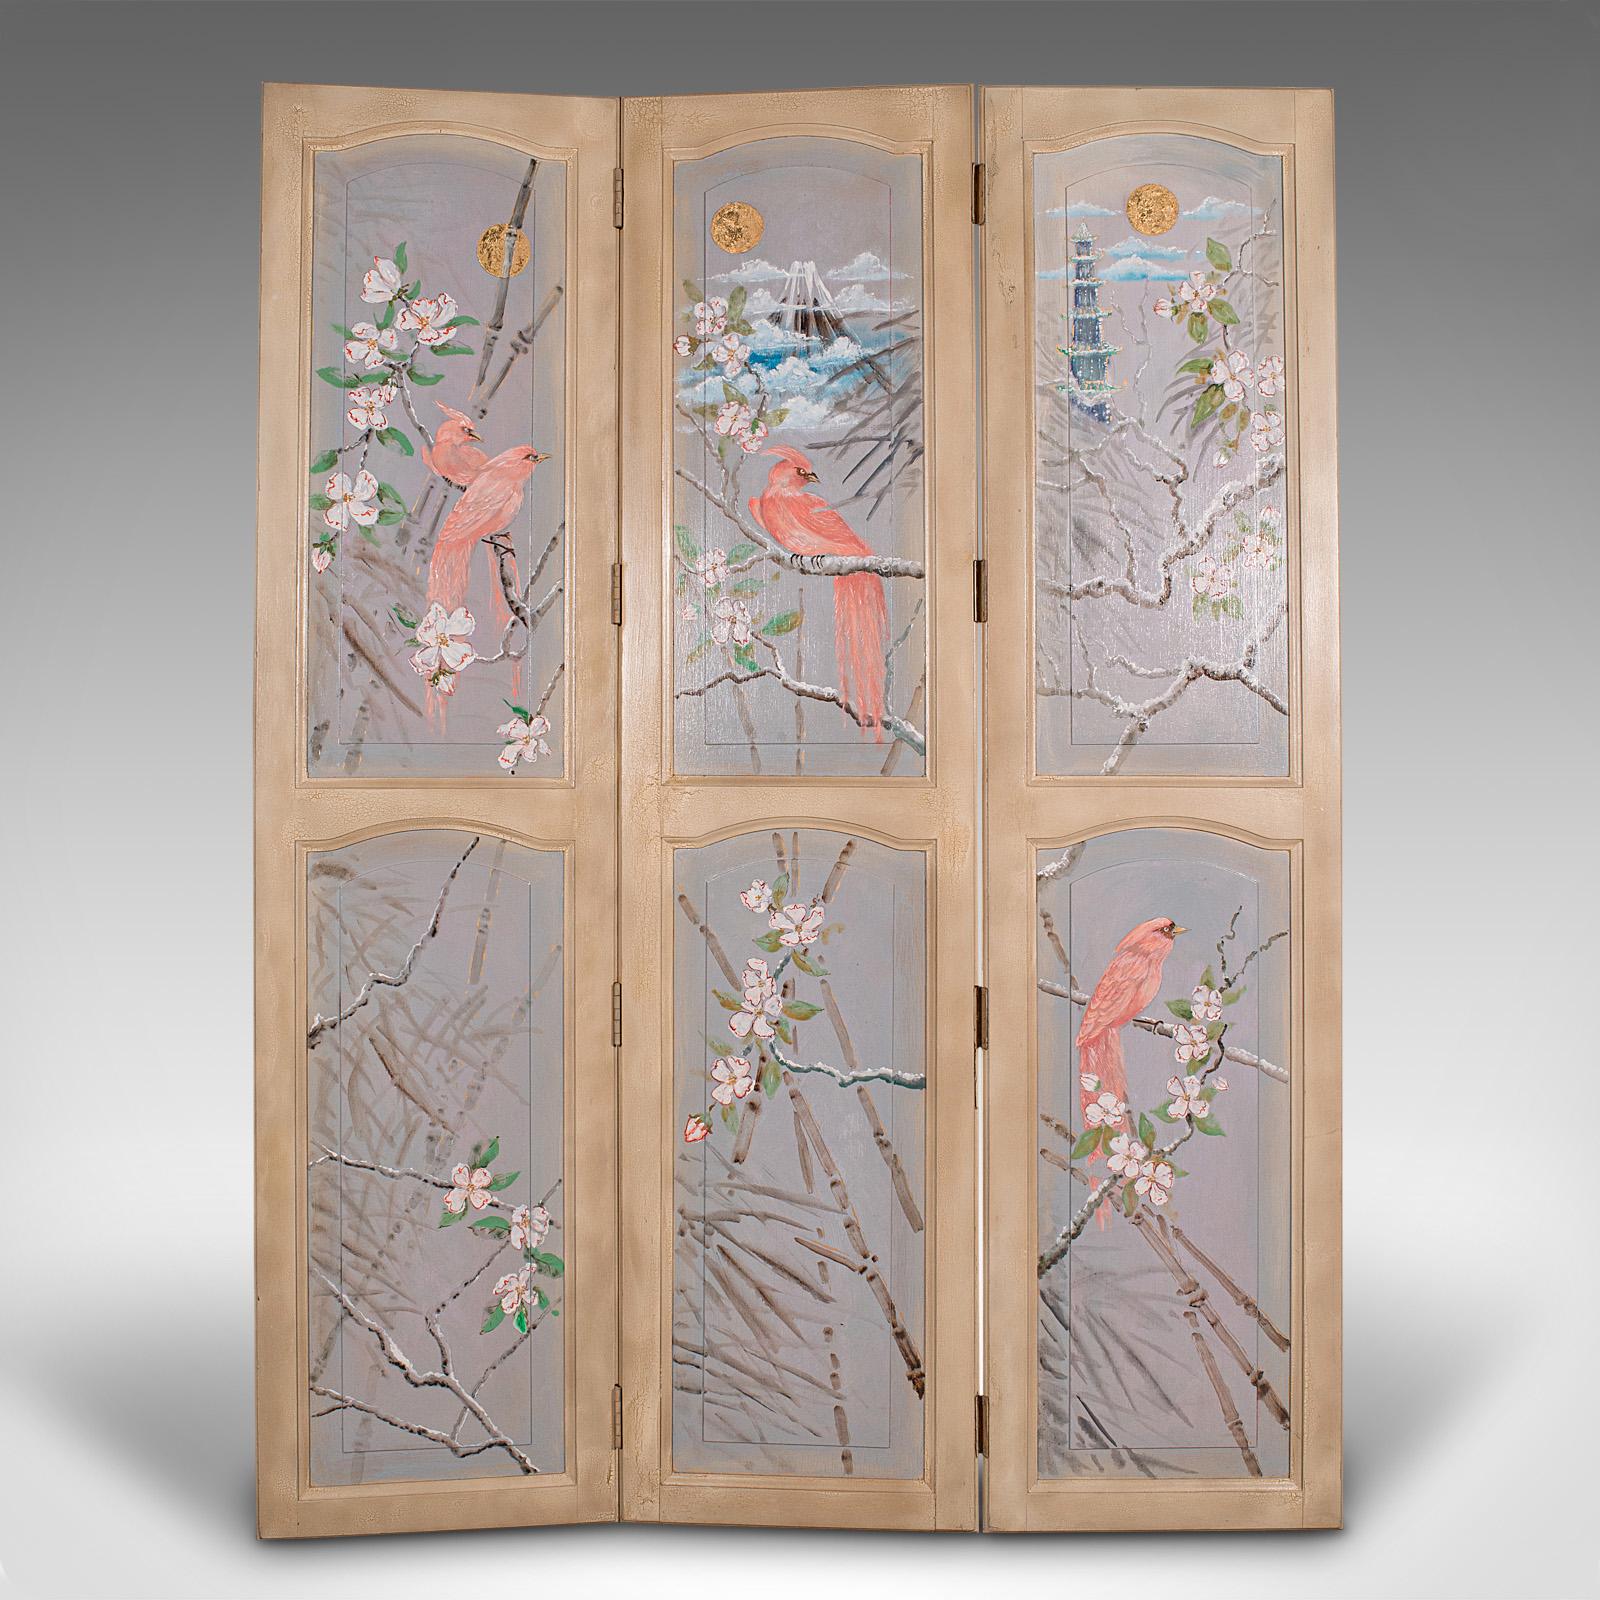 This is an antique privacy screen. An English, handpainted pine 3 panel room divider in Japanese taste, dating to the Victorian period and later, circa 1900.

Strikingly decorative folding screen with wonderful painted scenes
Displaying a